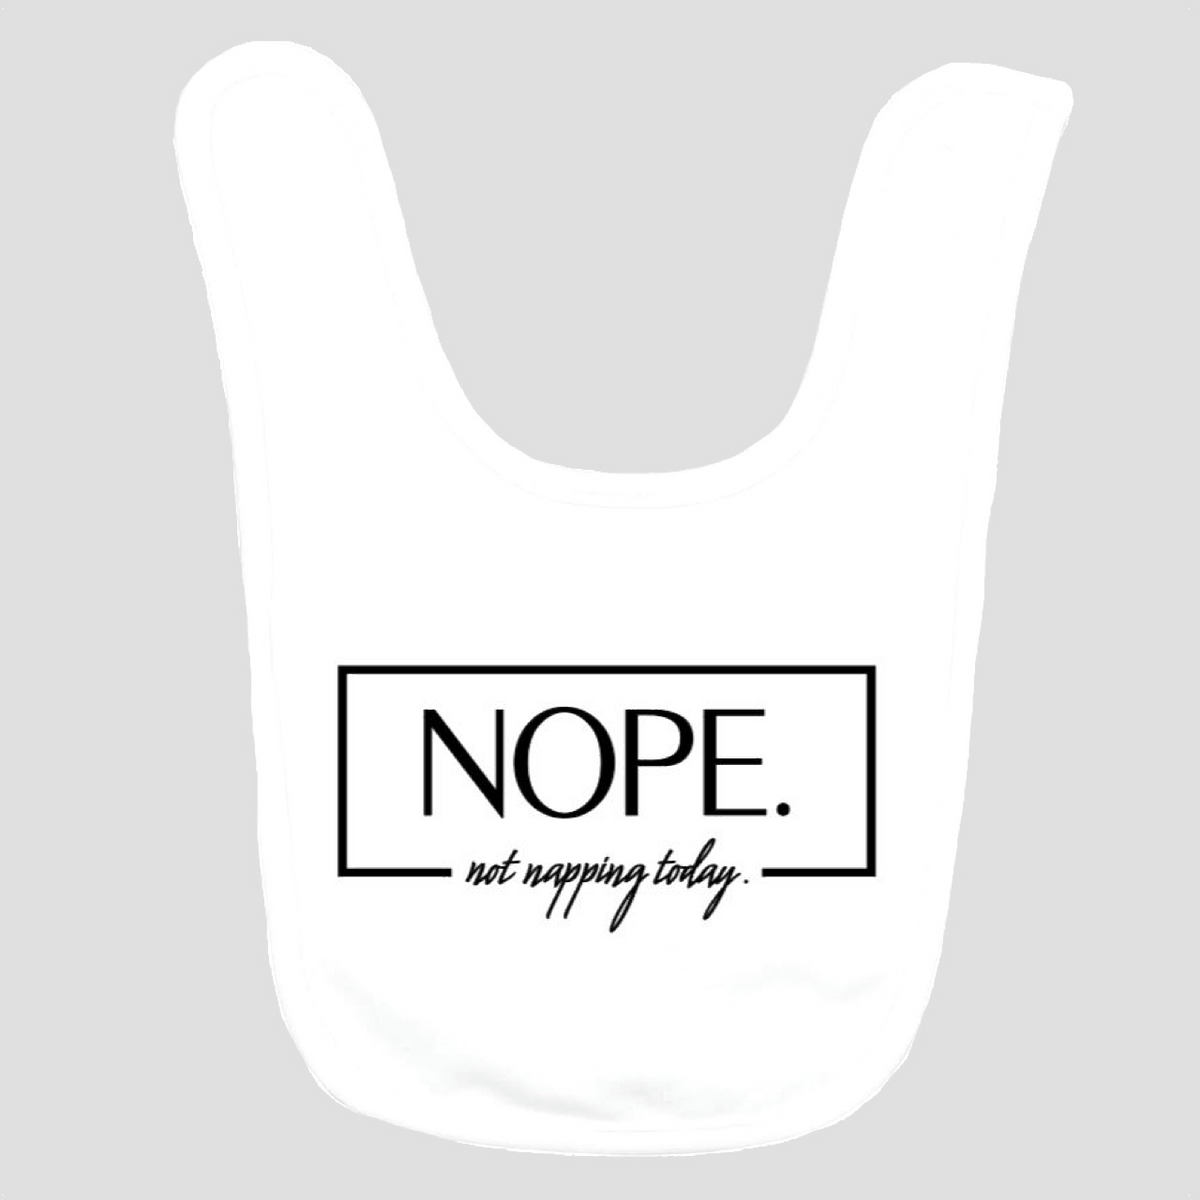 Baby Bib: Nope. Not napping today.